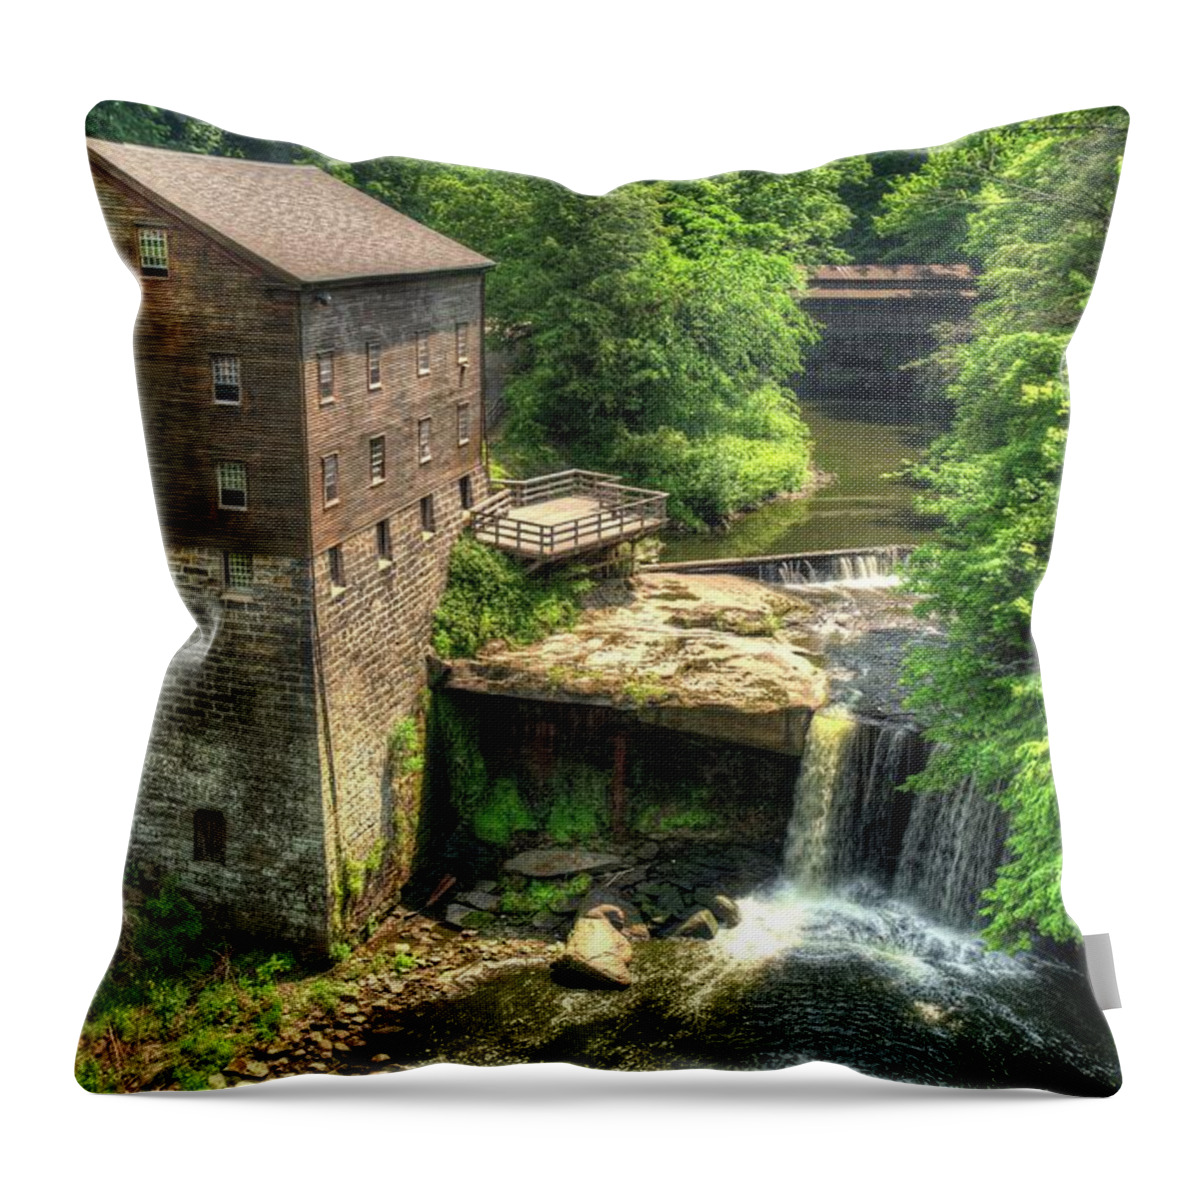 Lantermans Mill Throw Pillow featuring the photograph Lanterman's Mill and Covered Bridge - Youngstown Ohio by Gregory Ballos